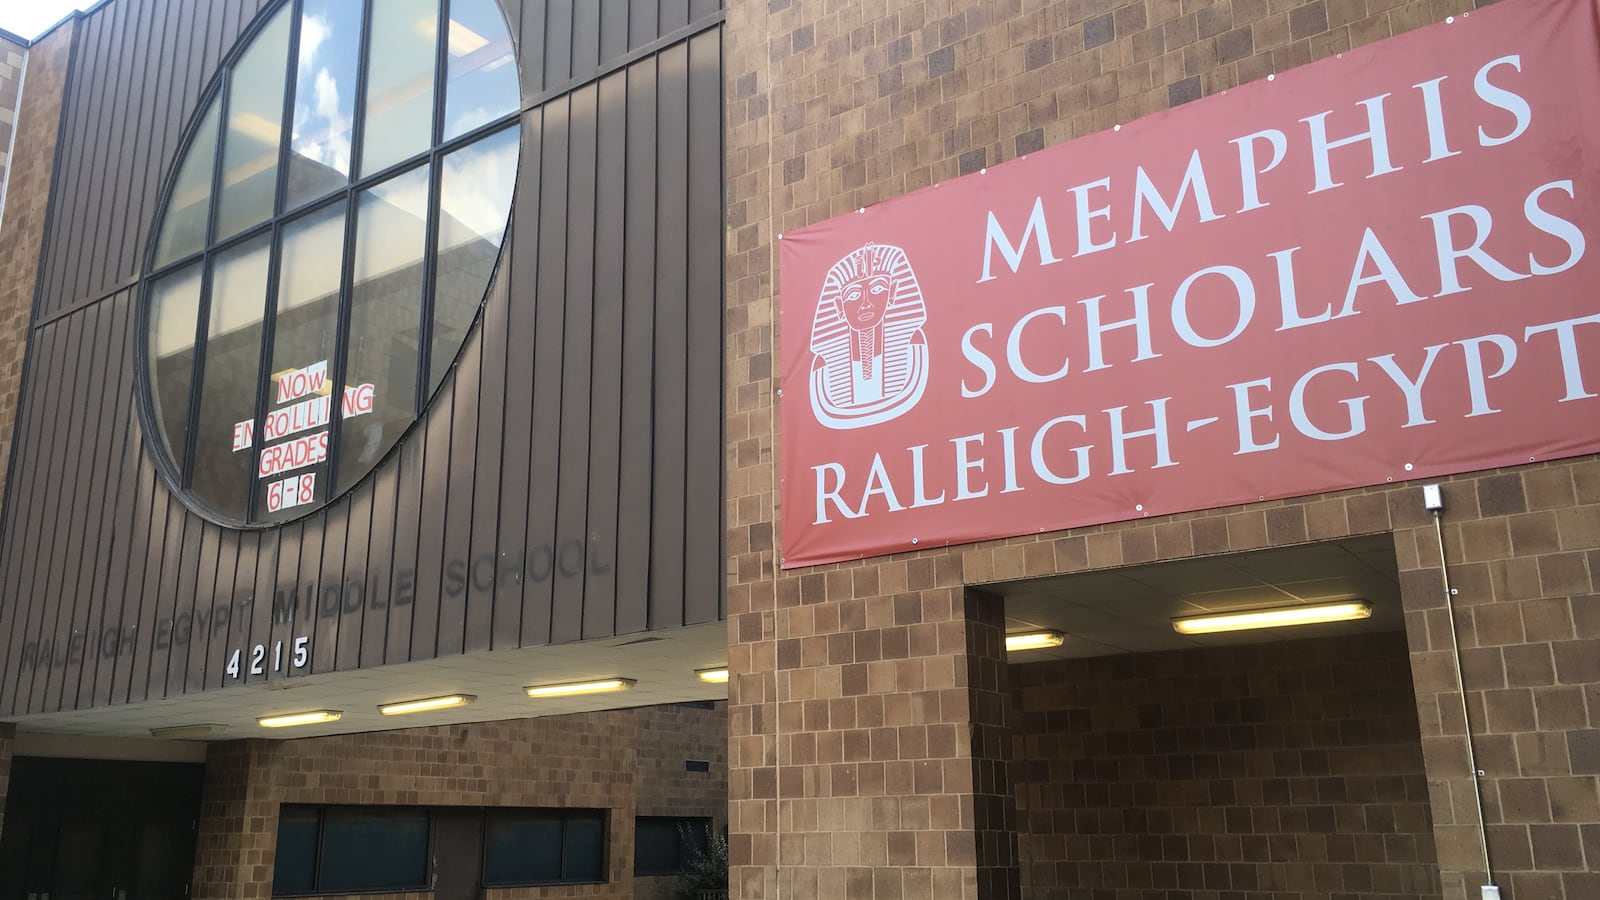 The new sign for Memphis Scholars Raleigh-Egypt is hung near the faded letters of the school’s former middle school name under Shelby County Schools.